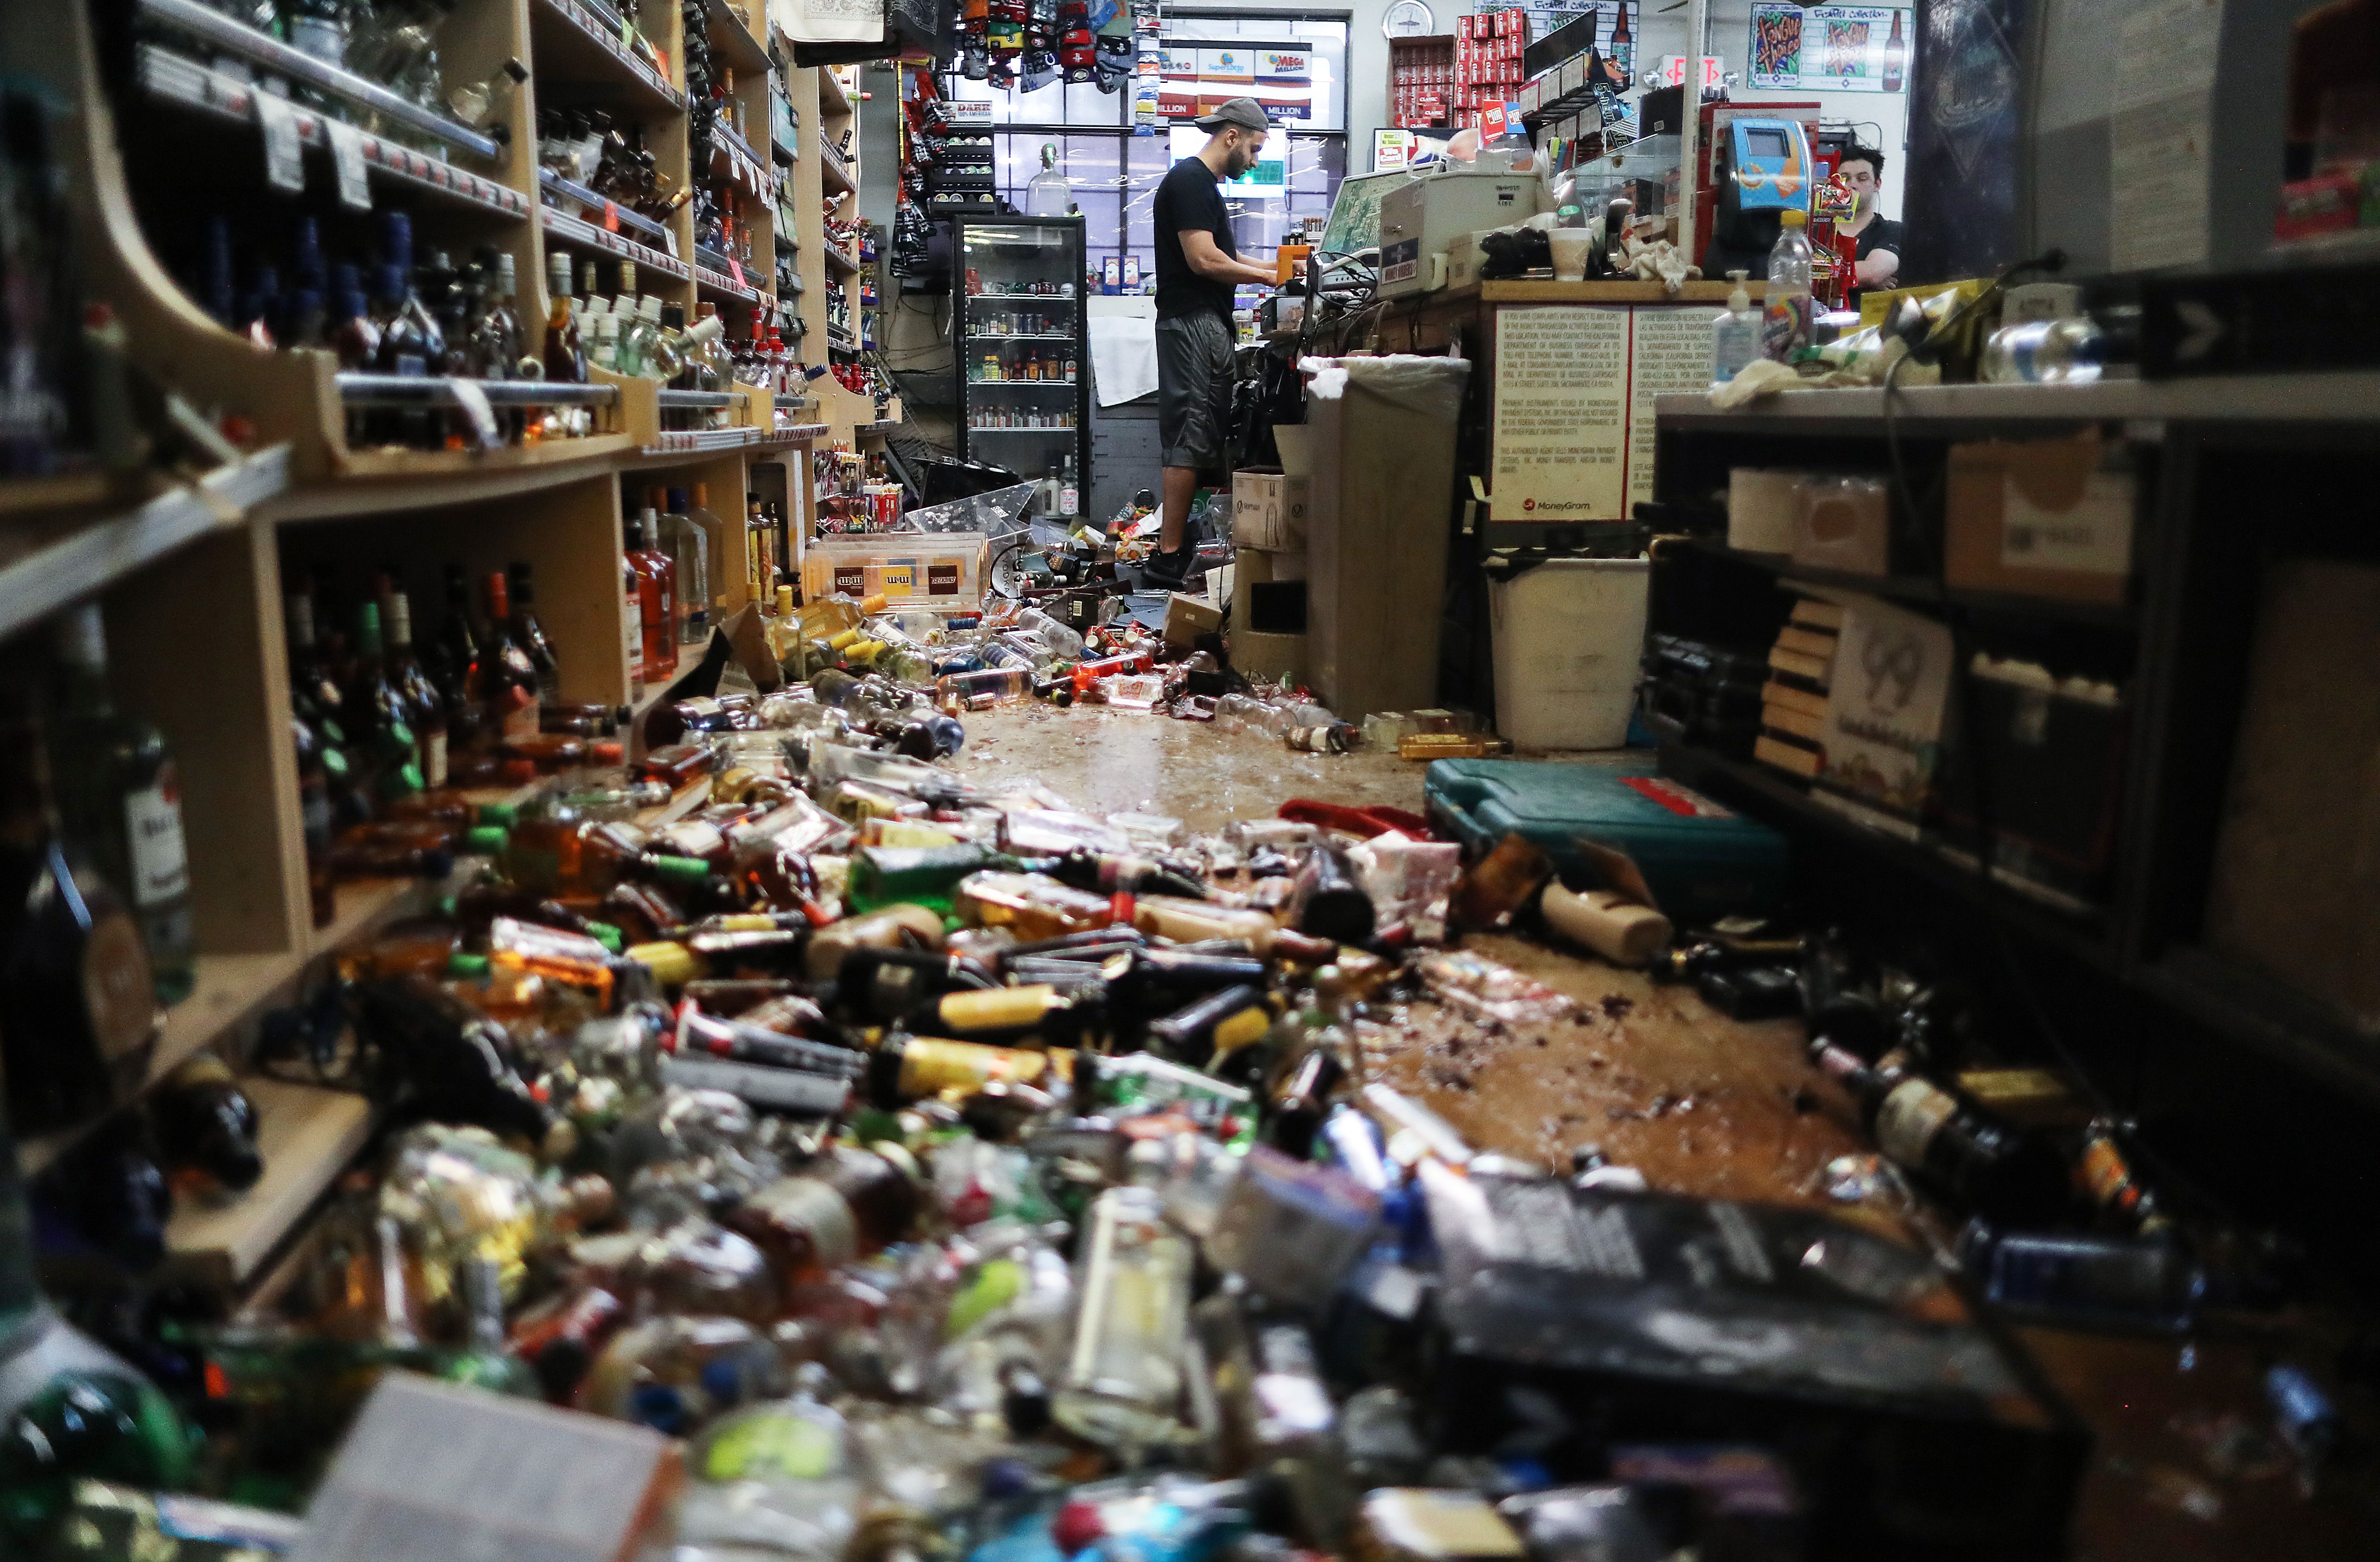 This image shows a liquor store aisle swamped with broken bottles and spilled alcohol. 